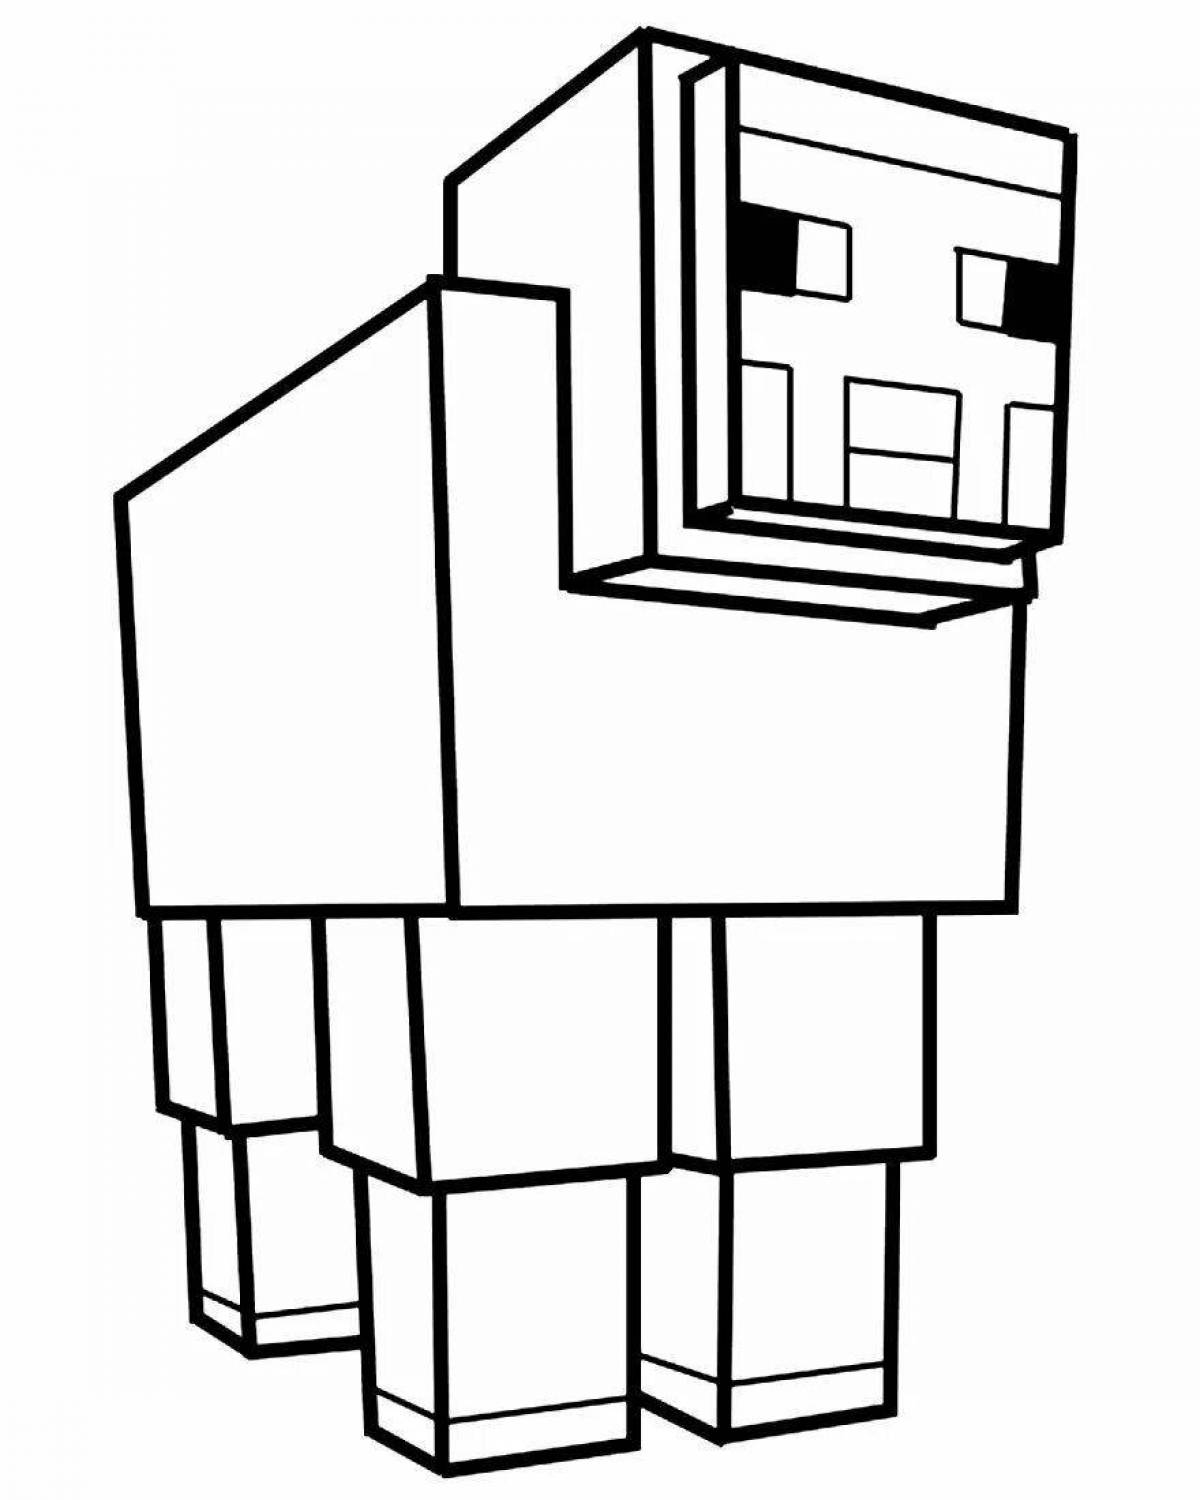 Cute pig minecraft coloring